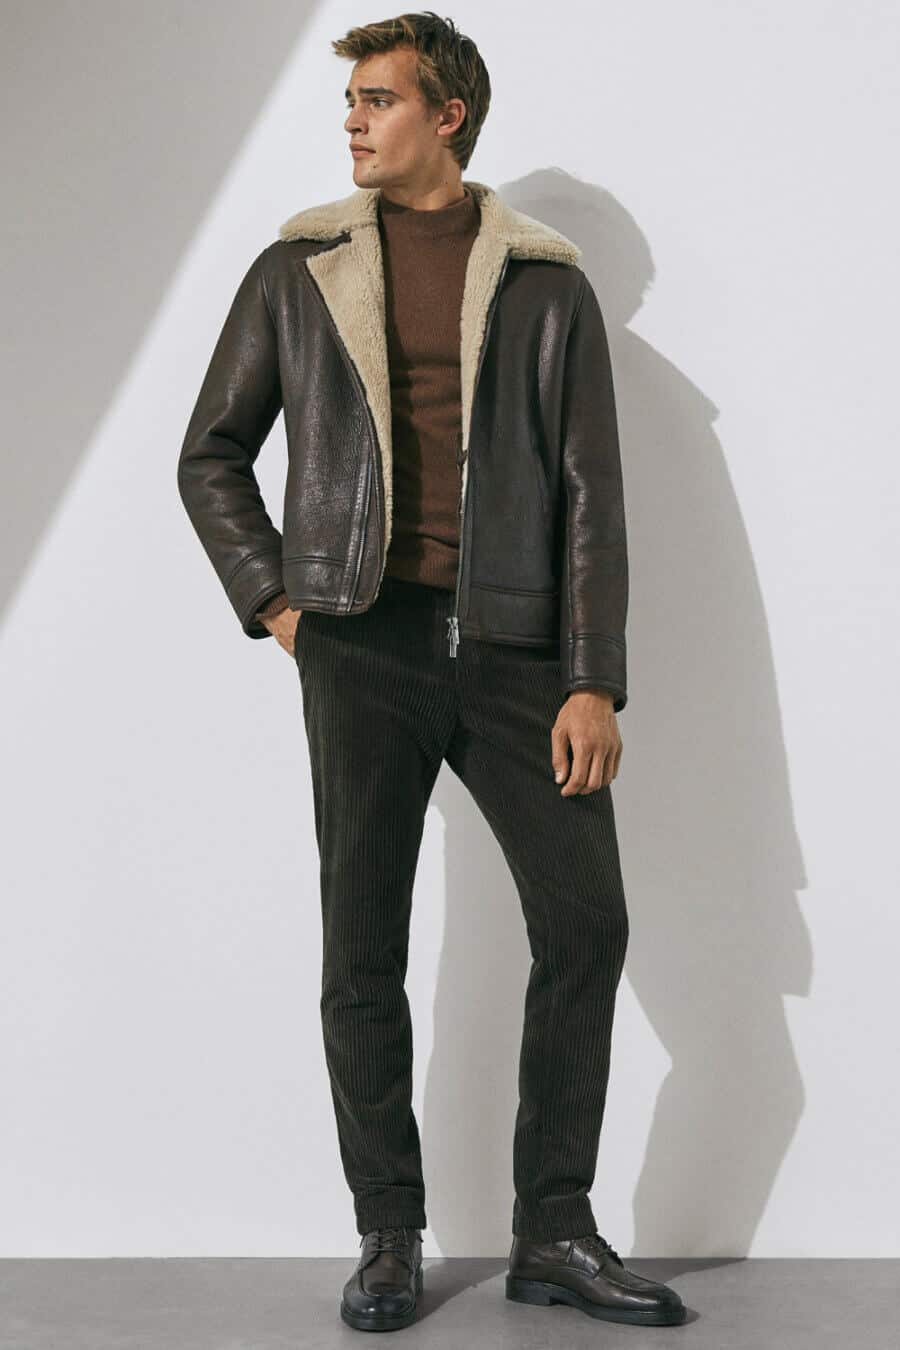 Men's brown leather shearling jacket, sweater, corduroys and boots outfit